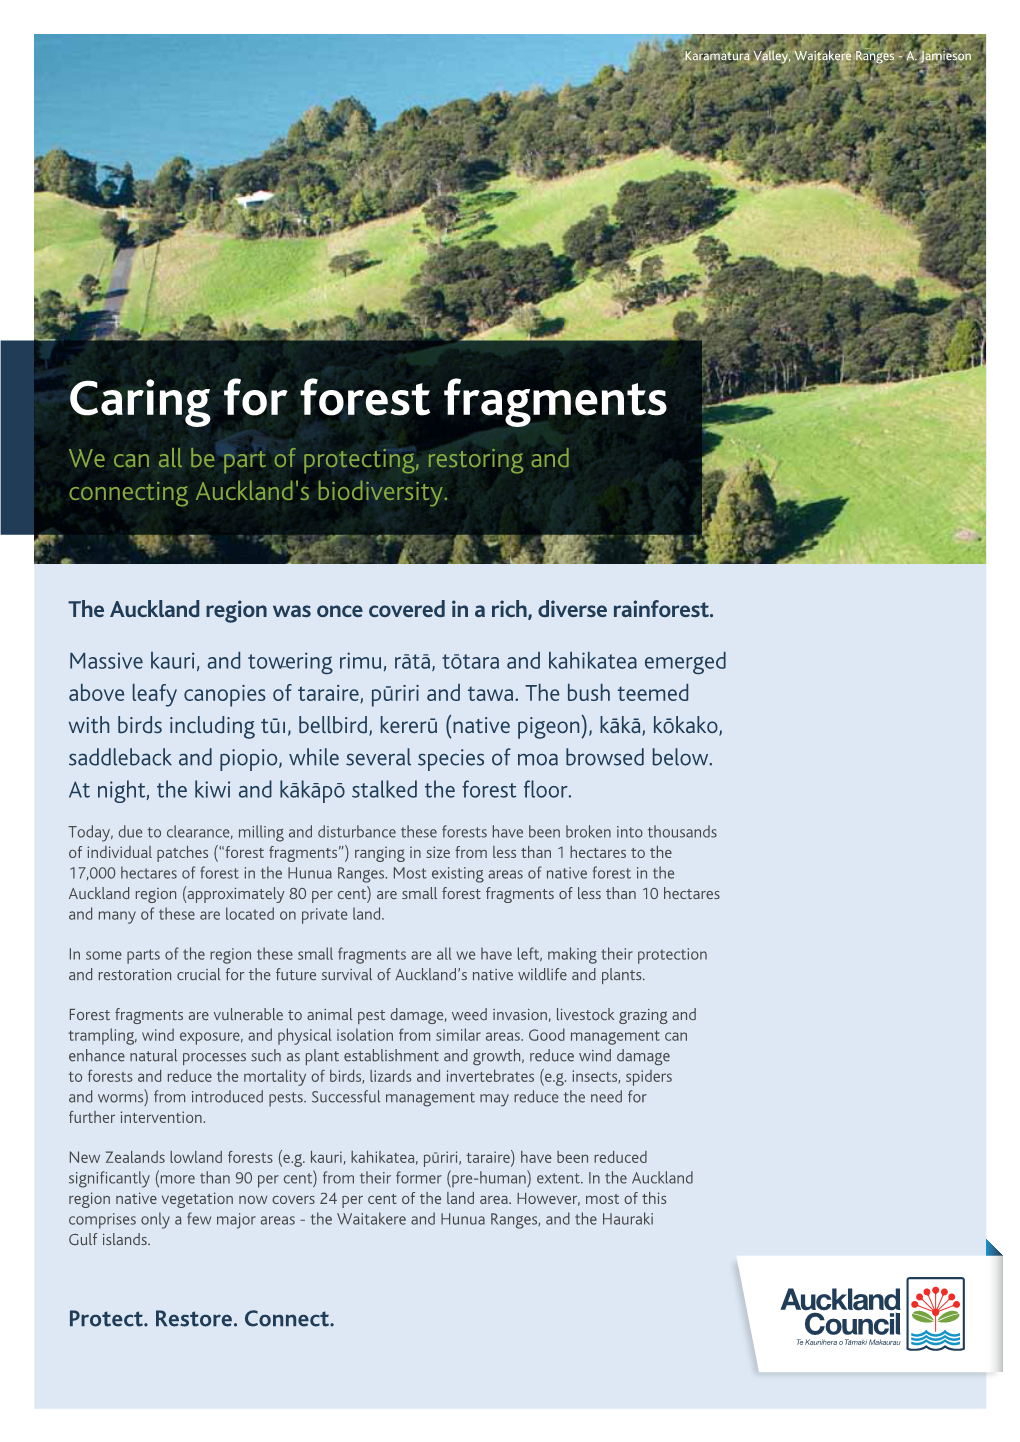 Caring for Forest Fragments We Can All Be Part of Protecting, Restoring and Connecting Auckland's Biodiversity